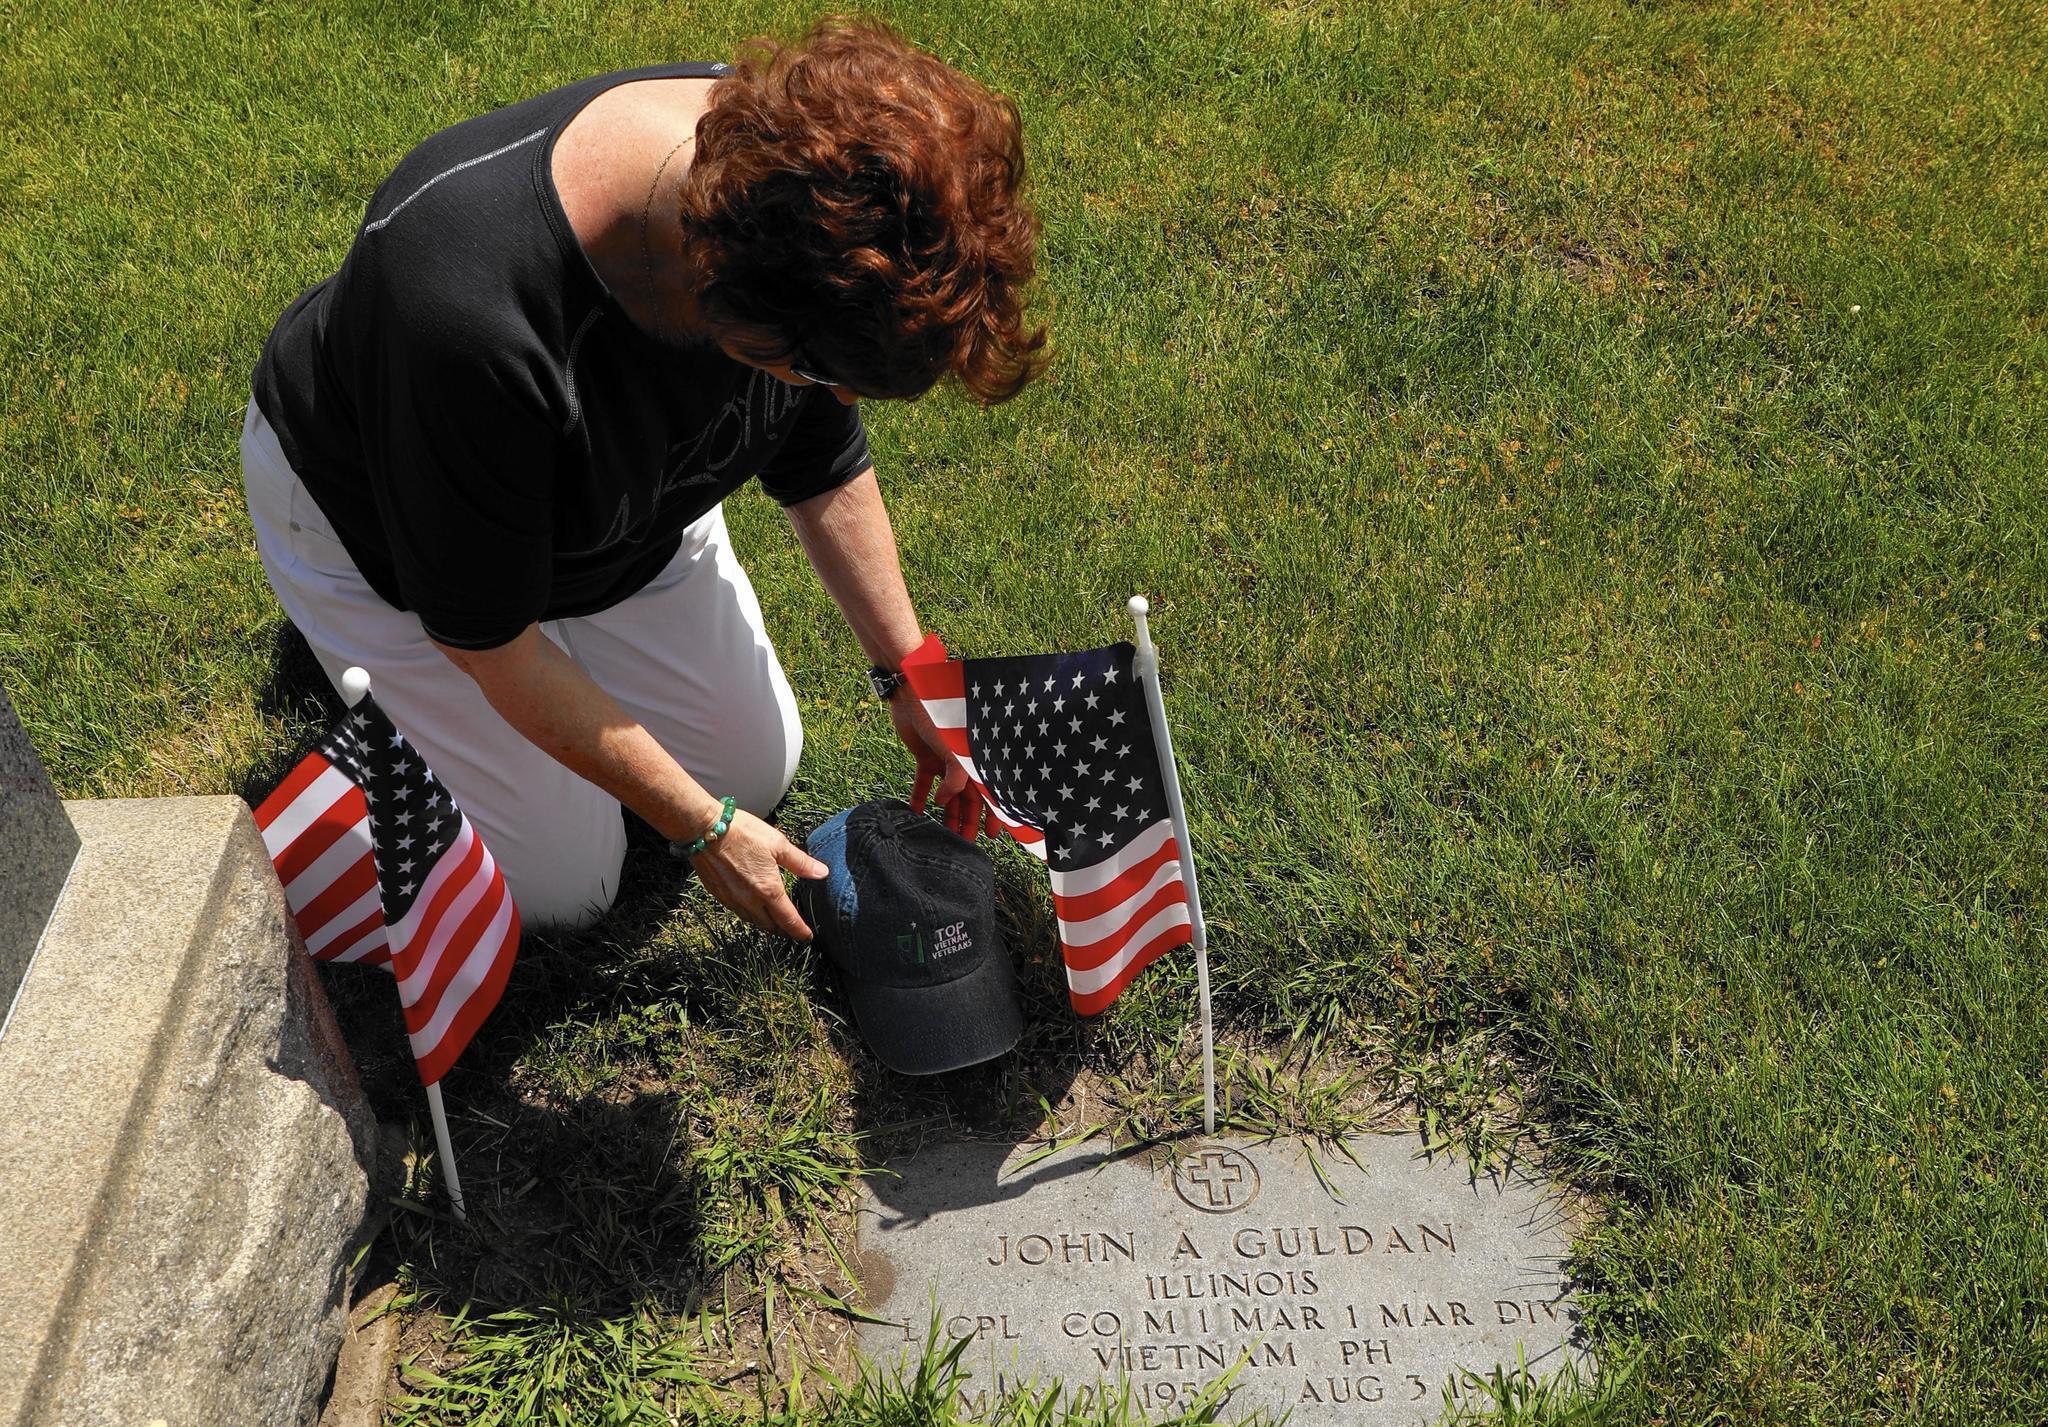 Oak Lawn woman who lost fiance to Vietnam, never wed mourns on Memorial Day